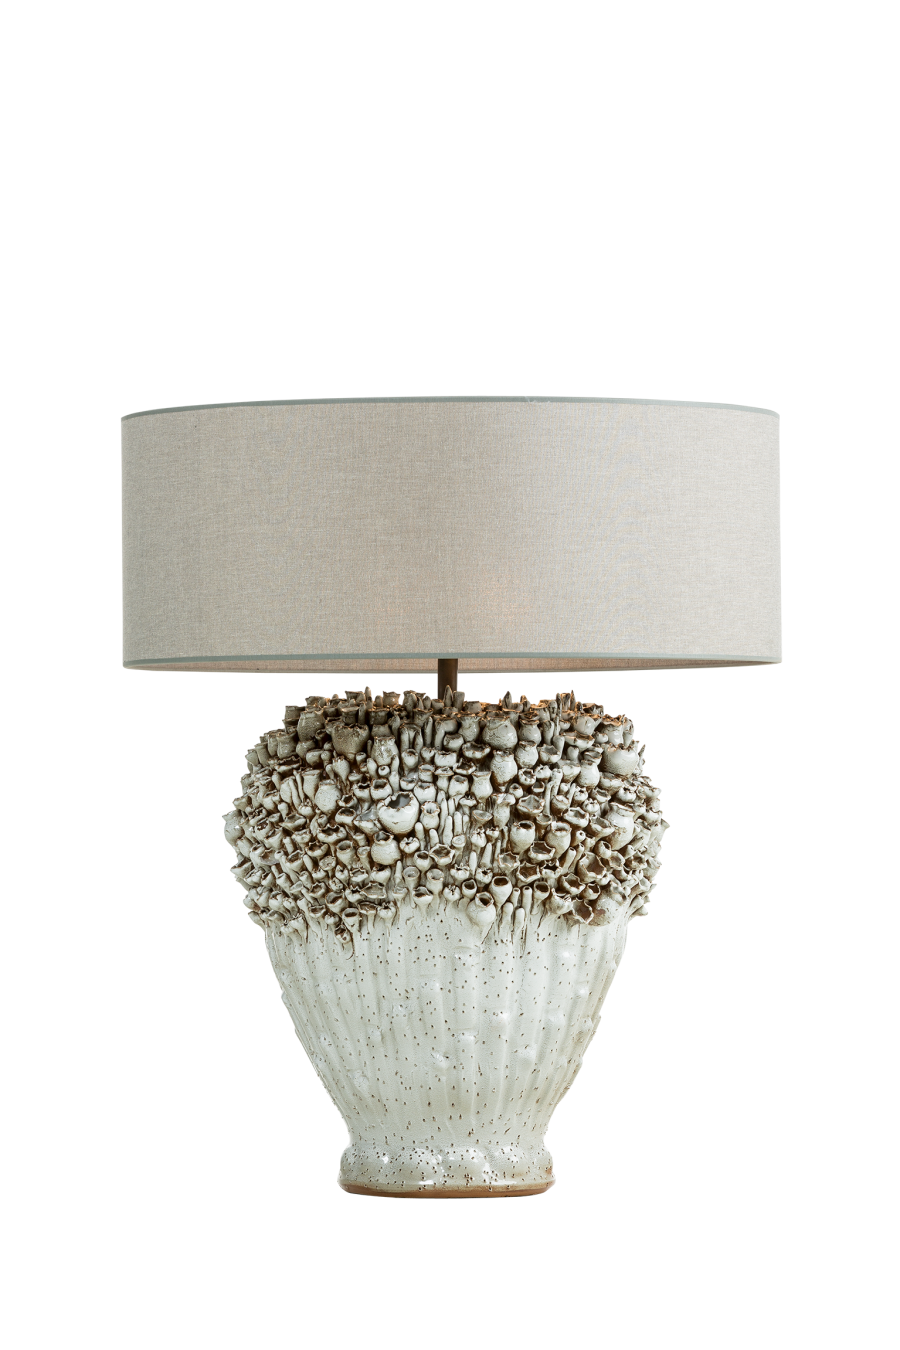 Giant Coral table lamp